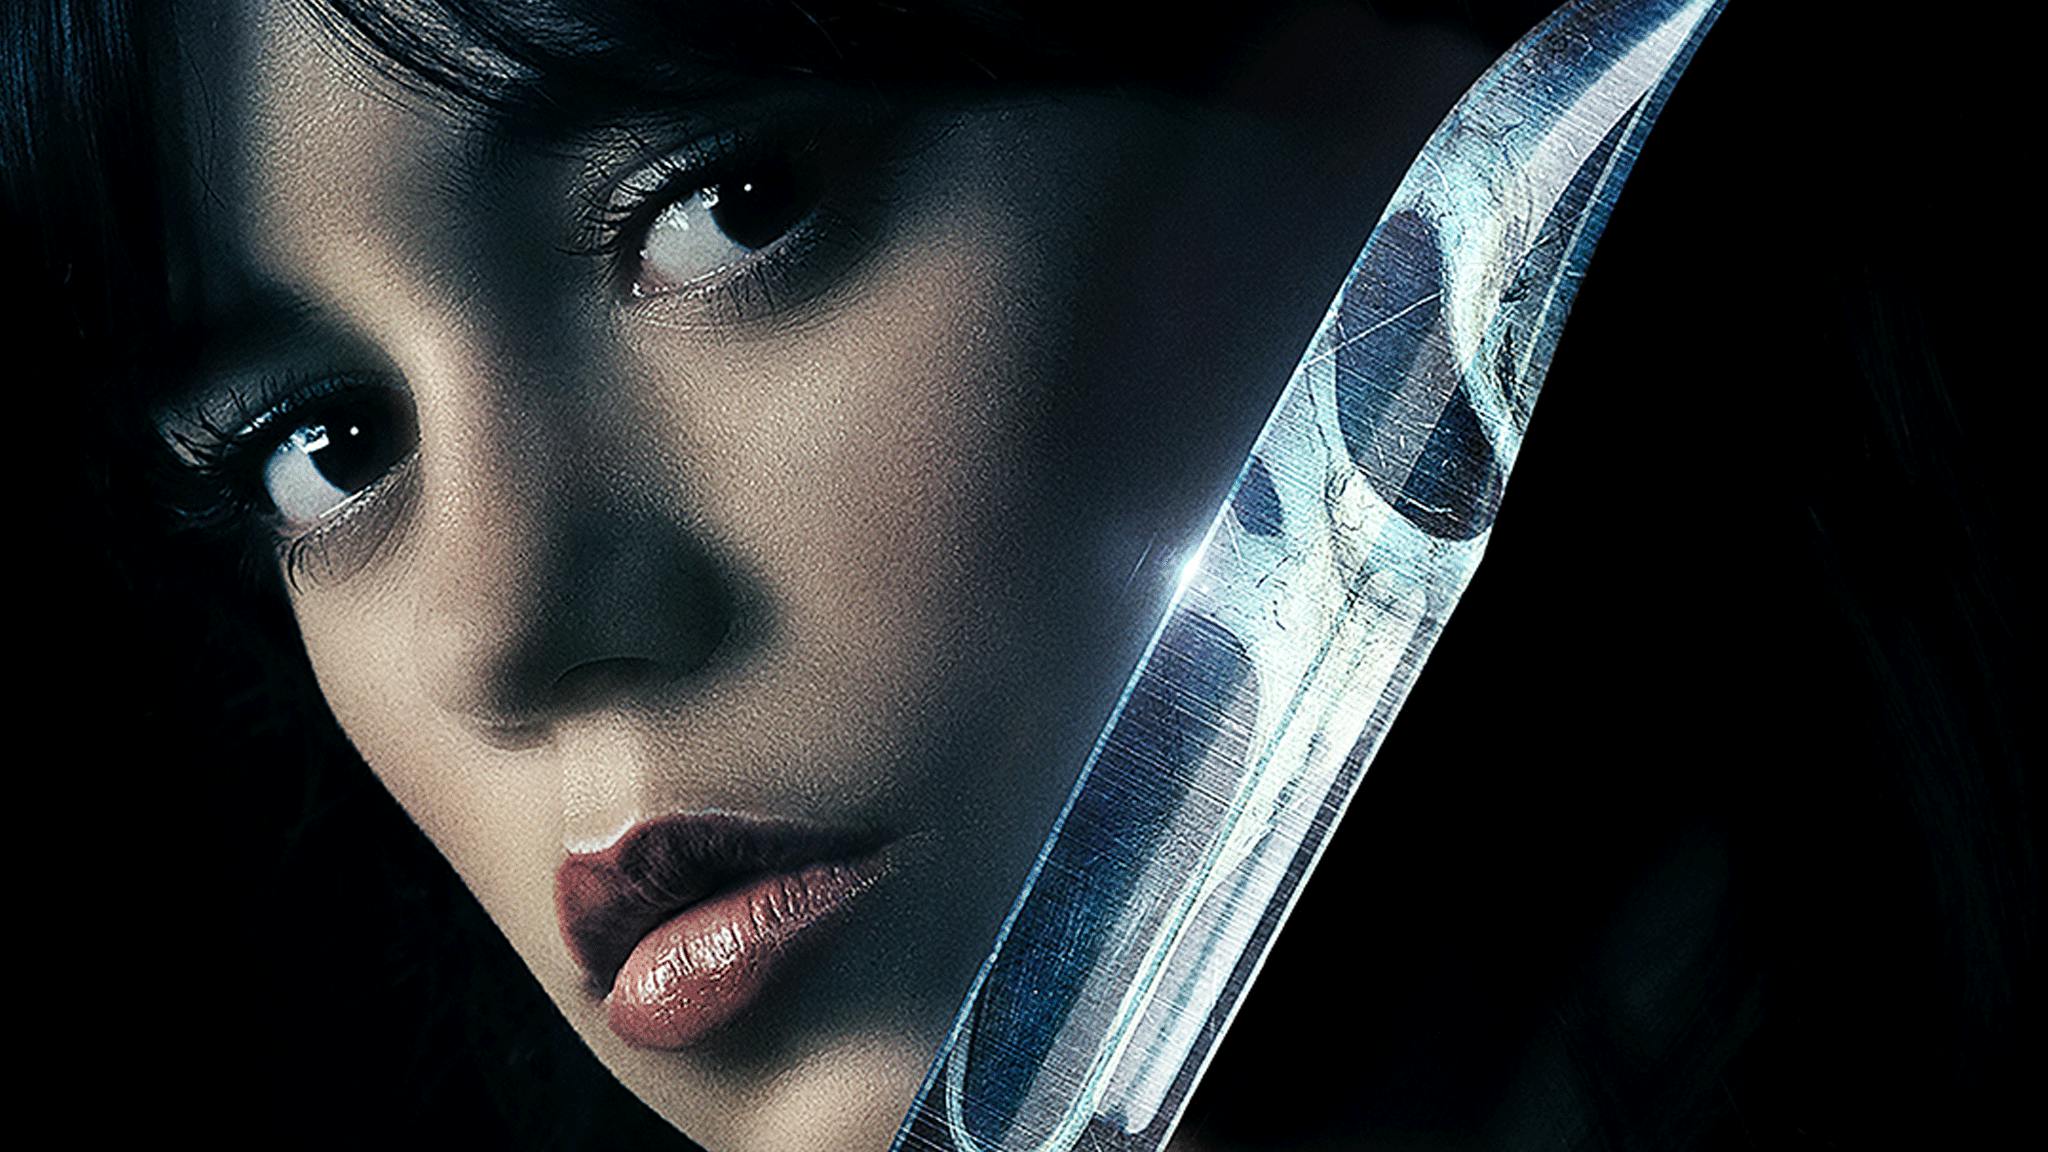 Check out the brand-new character posters for Scream VI